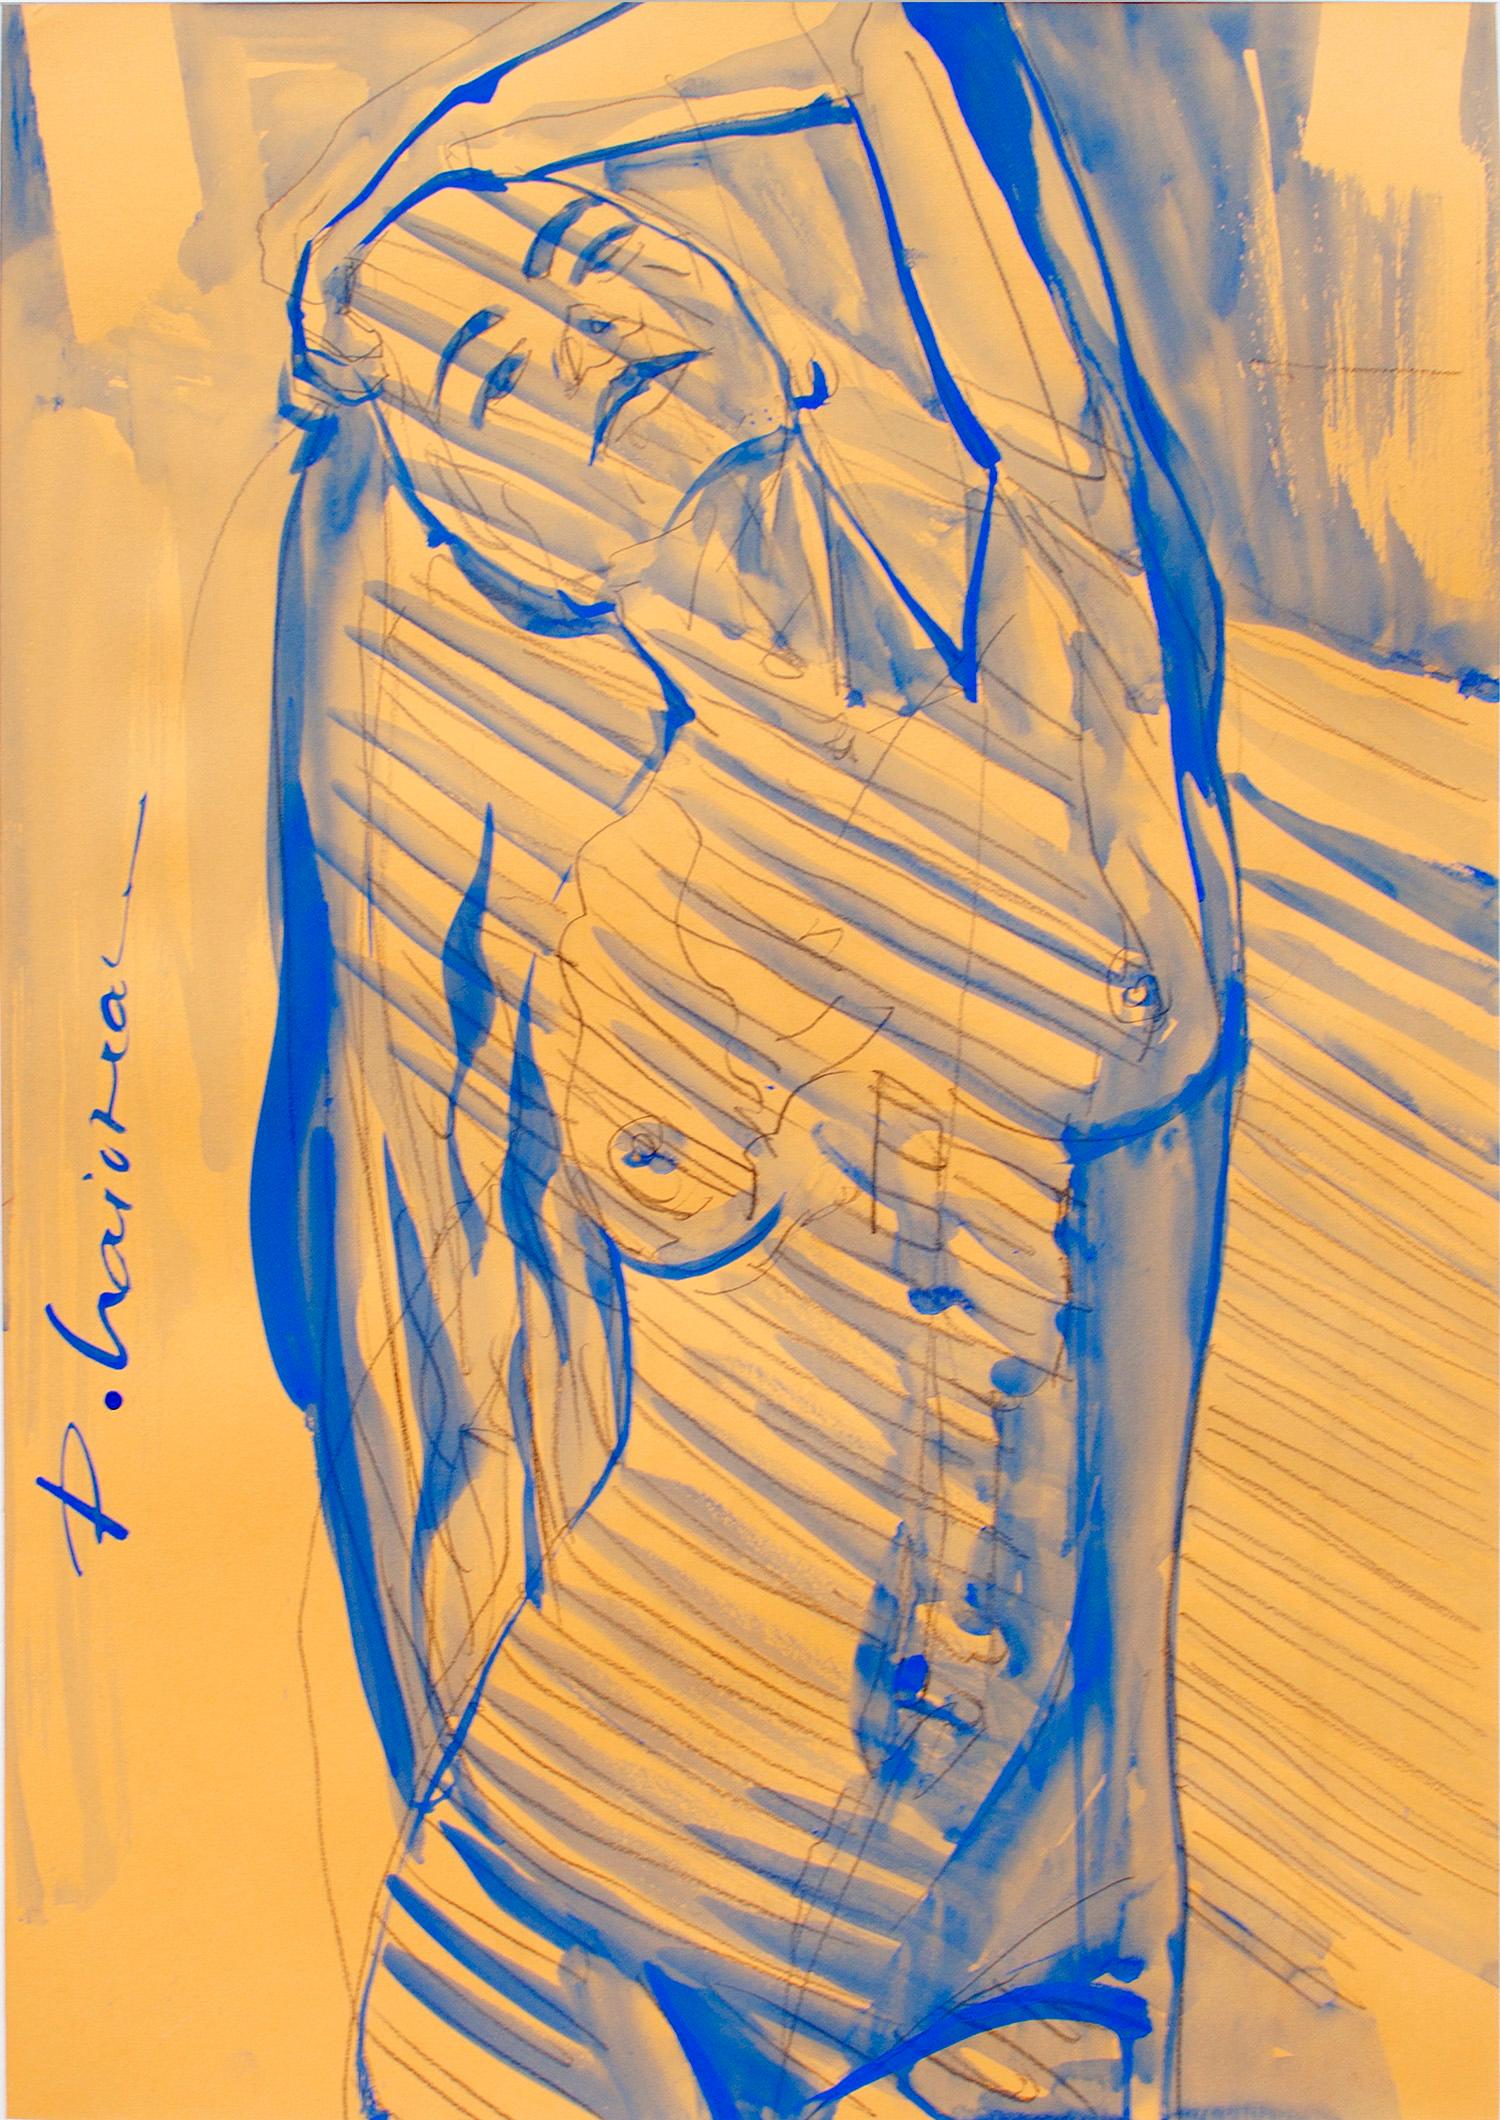 Nude in the Afternoon Sun, pencil and tempera on paper, inspired by Matisse.
Part of Nude in Interior series.
Shipped rolled in a tube, directly from the artist's studio.
In mat and framed as they were in the February exhibition, for display